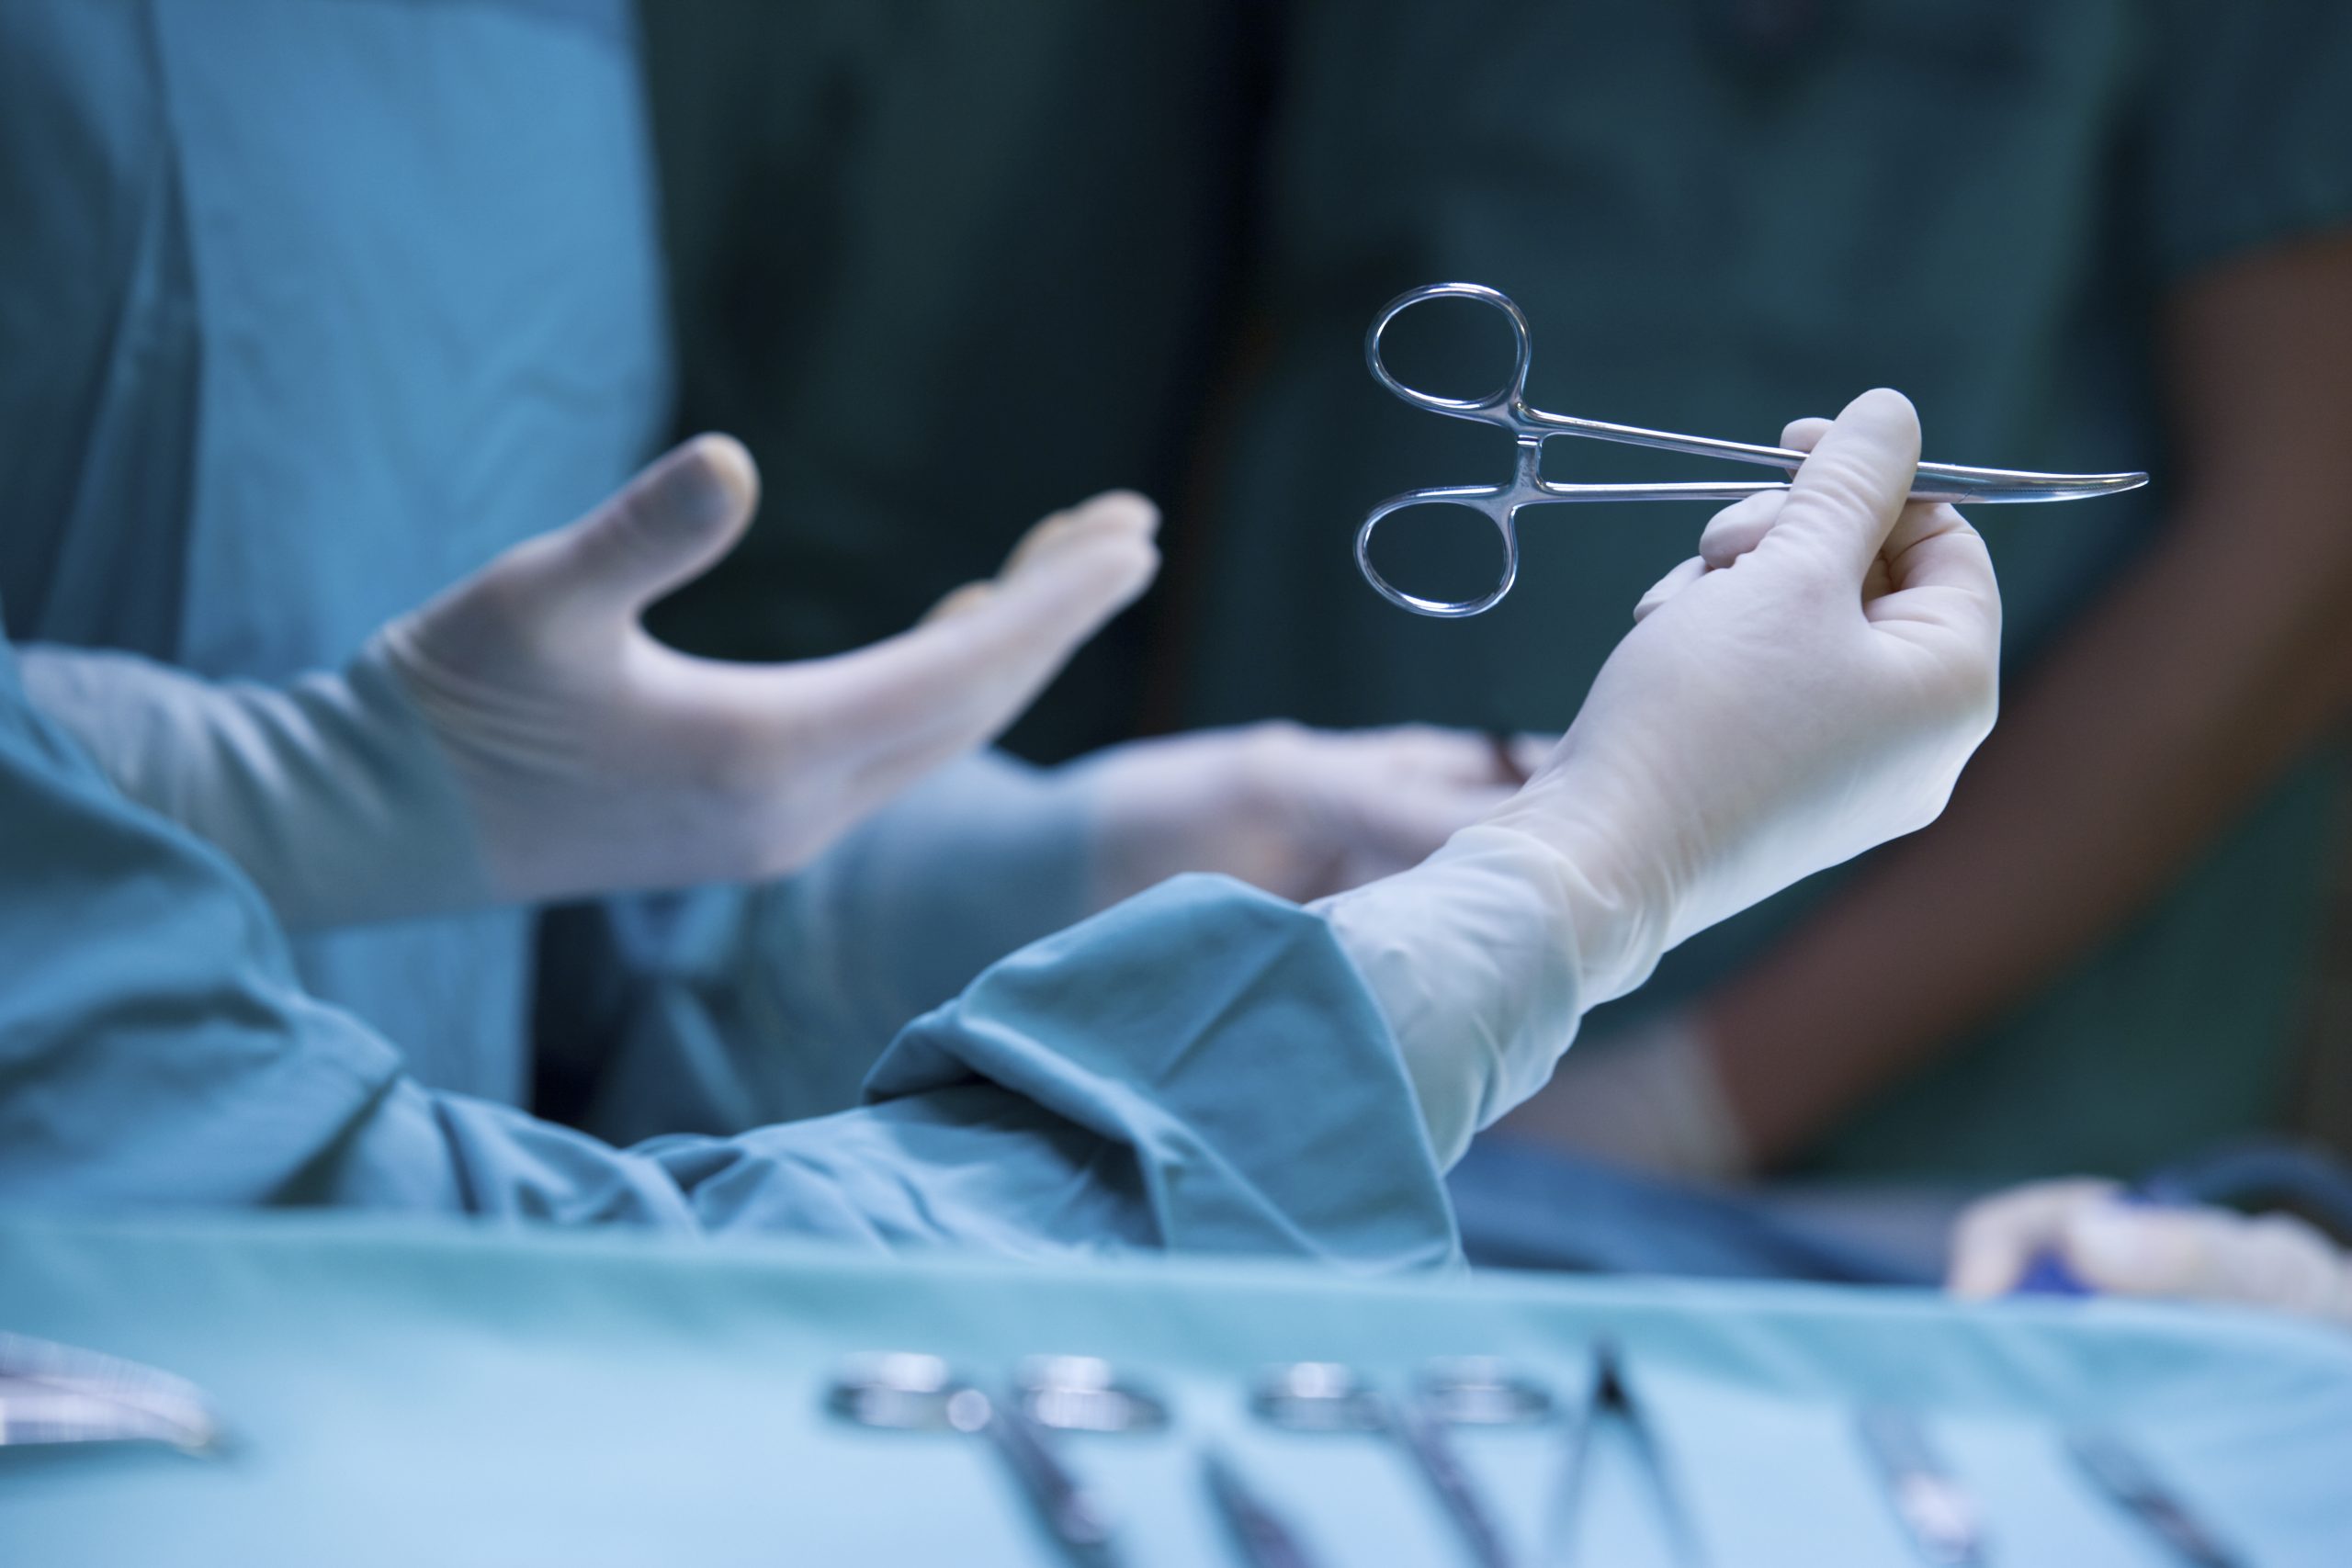 most common medical malpractice claims